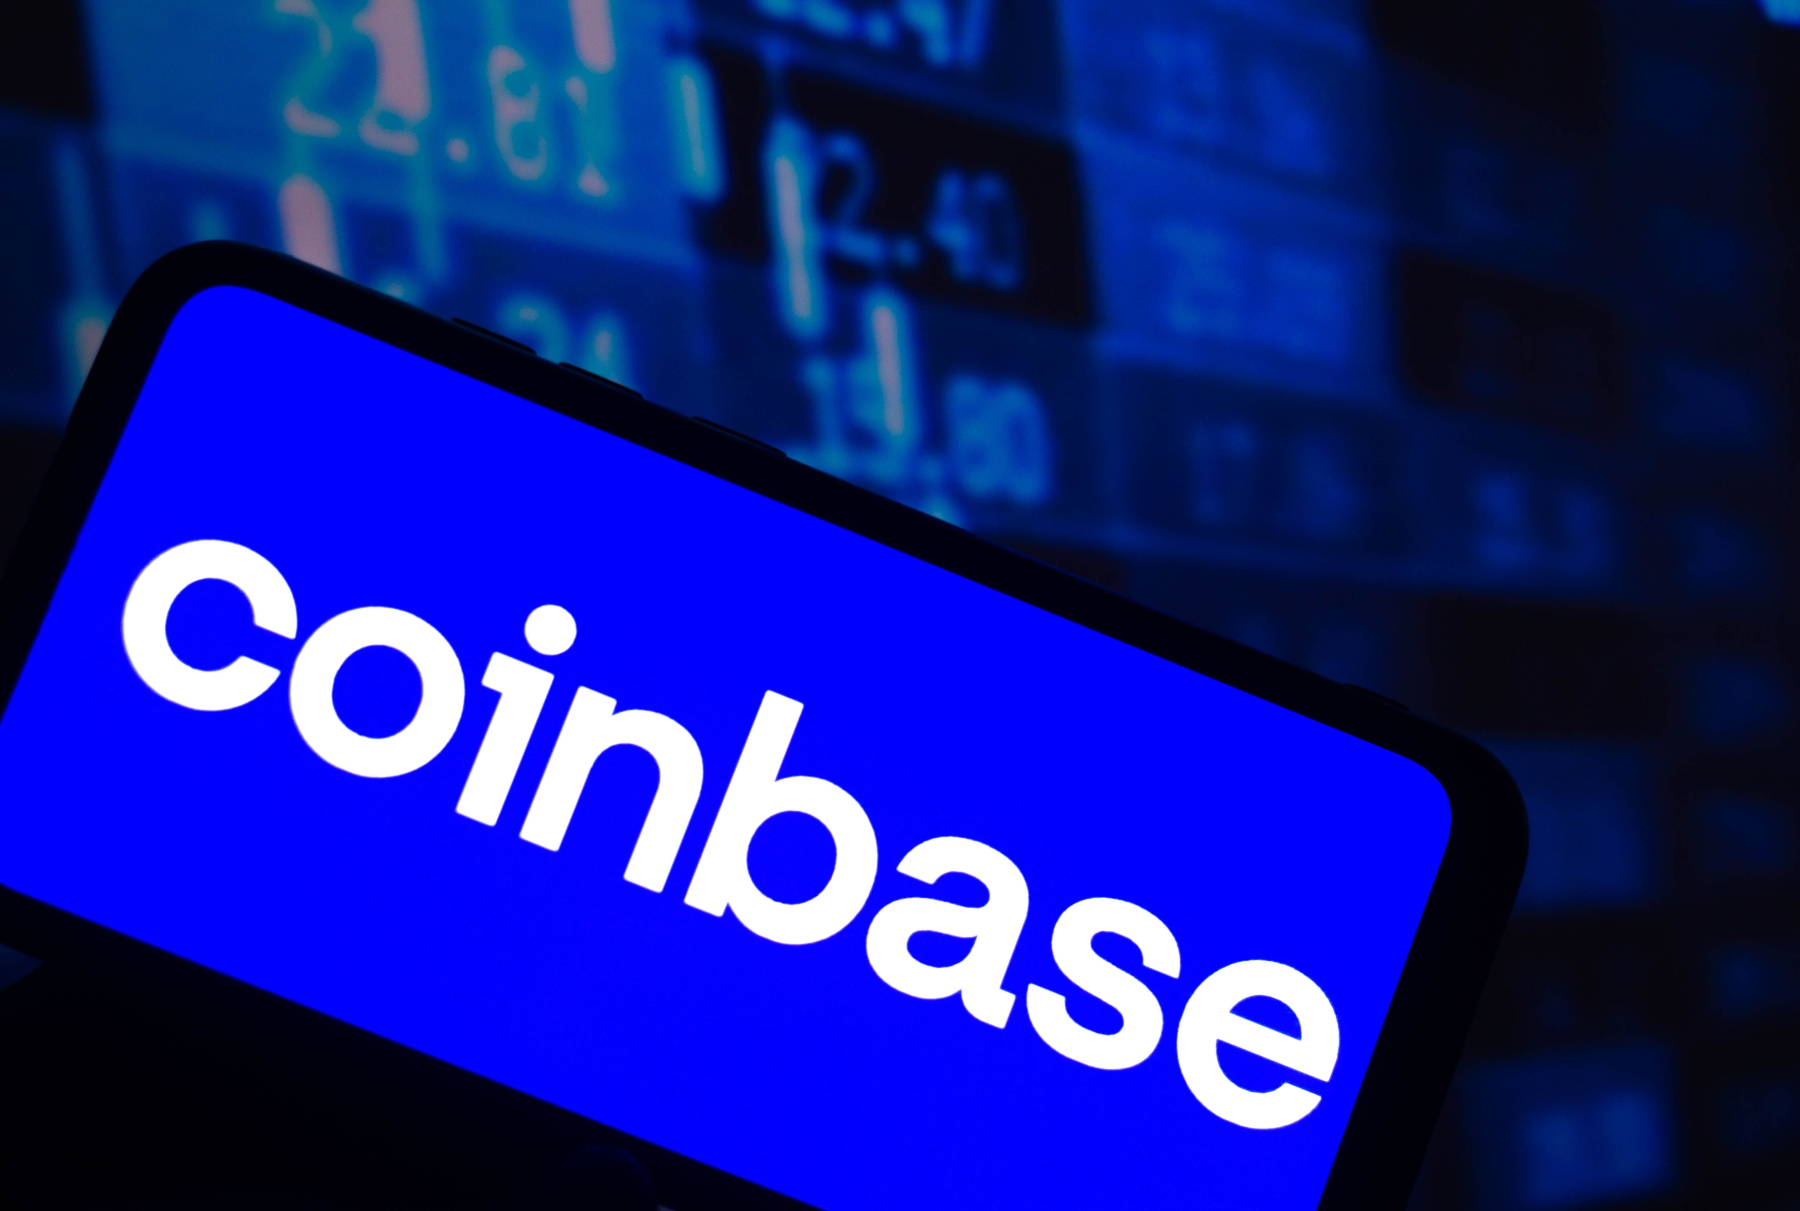 Coinbase shares at all-time low, while Bitcoin and Ethereum continue to fall
